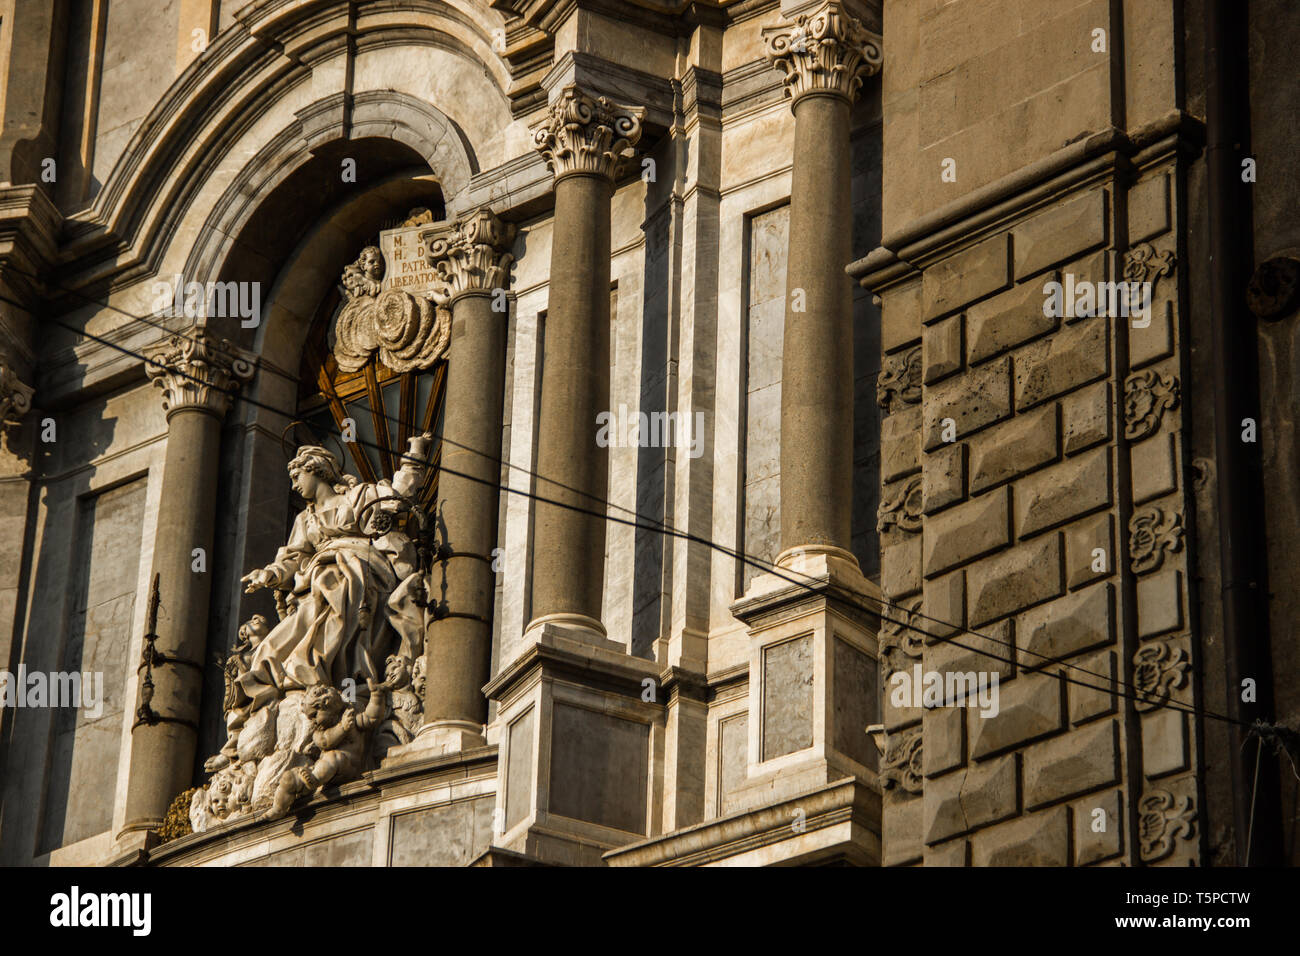 Catania cathedral facade detail with statue and baroque architecture Stock Photo